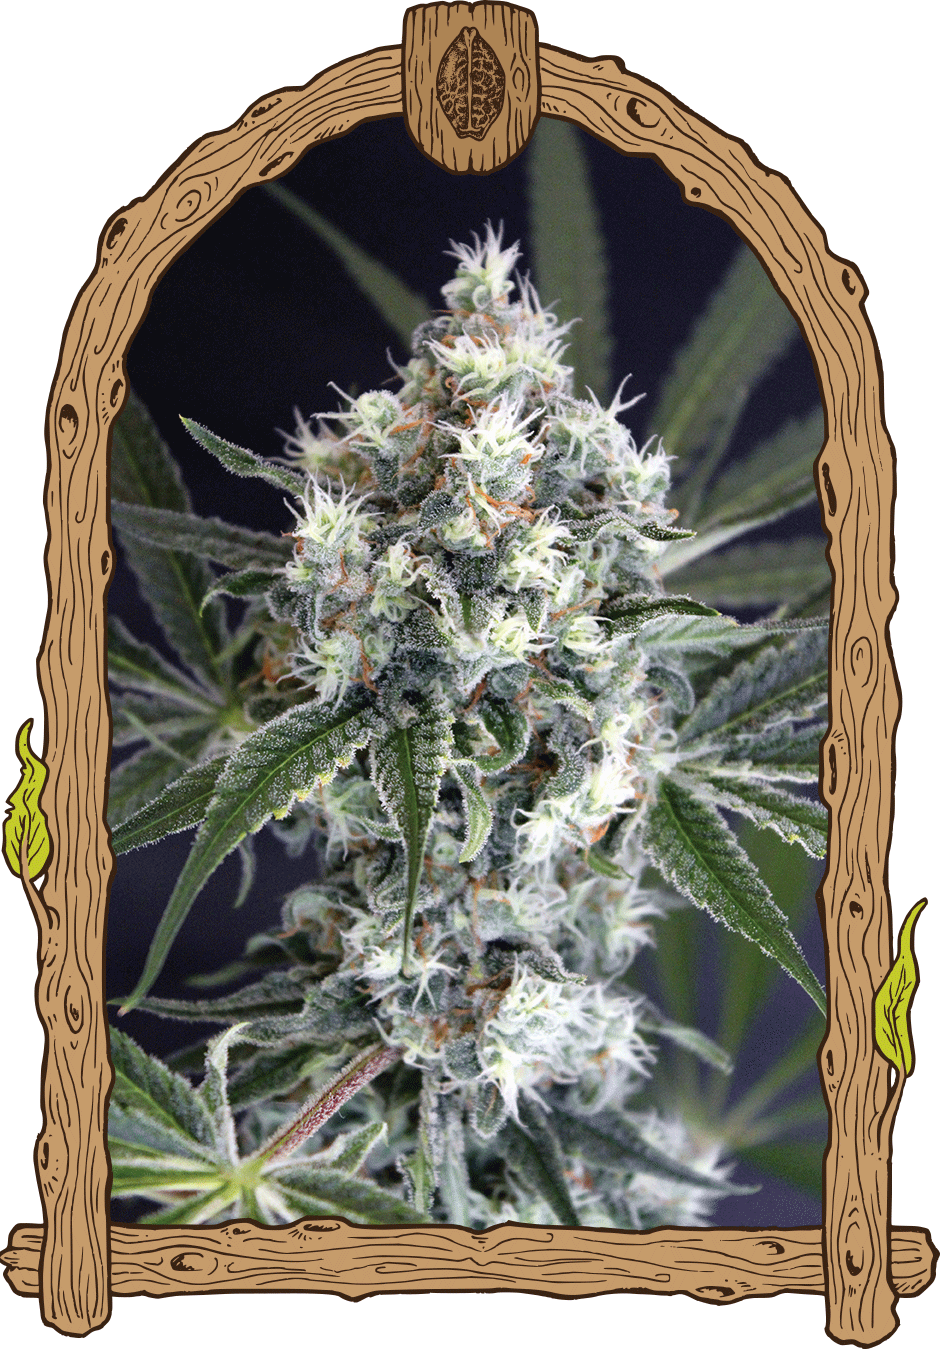 a drawing of a marijuana plant in a frame